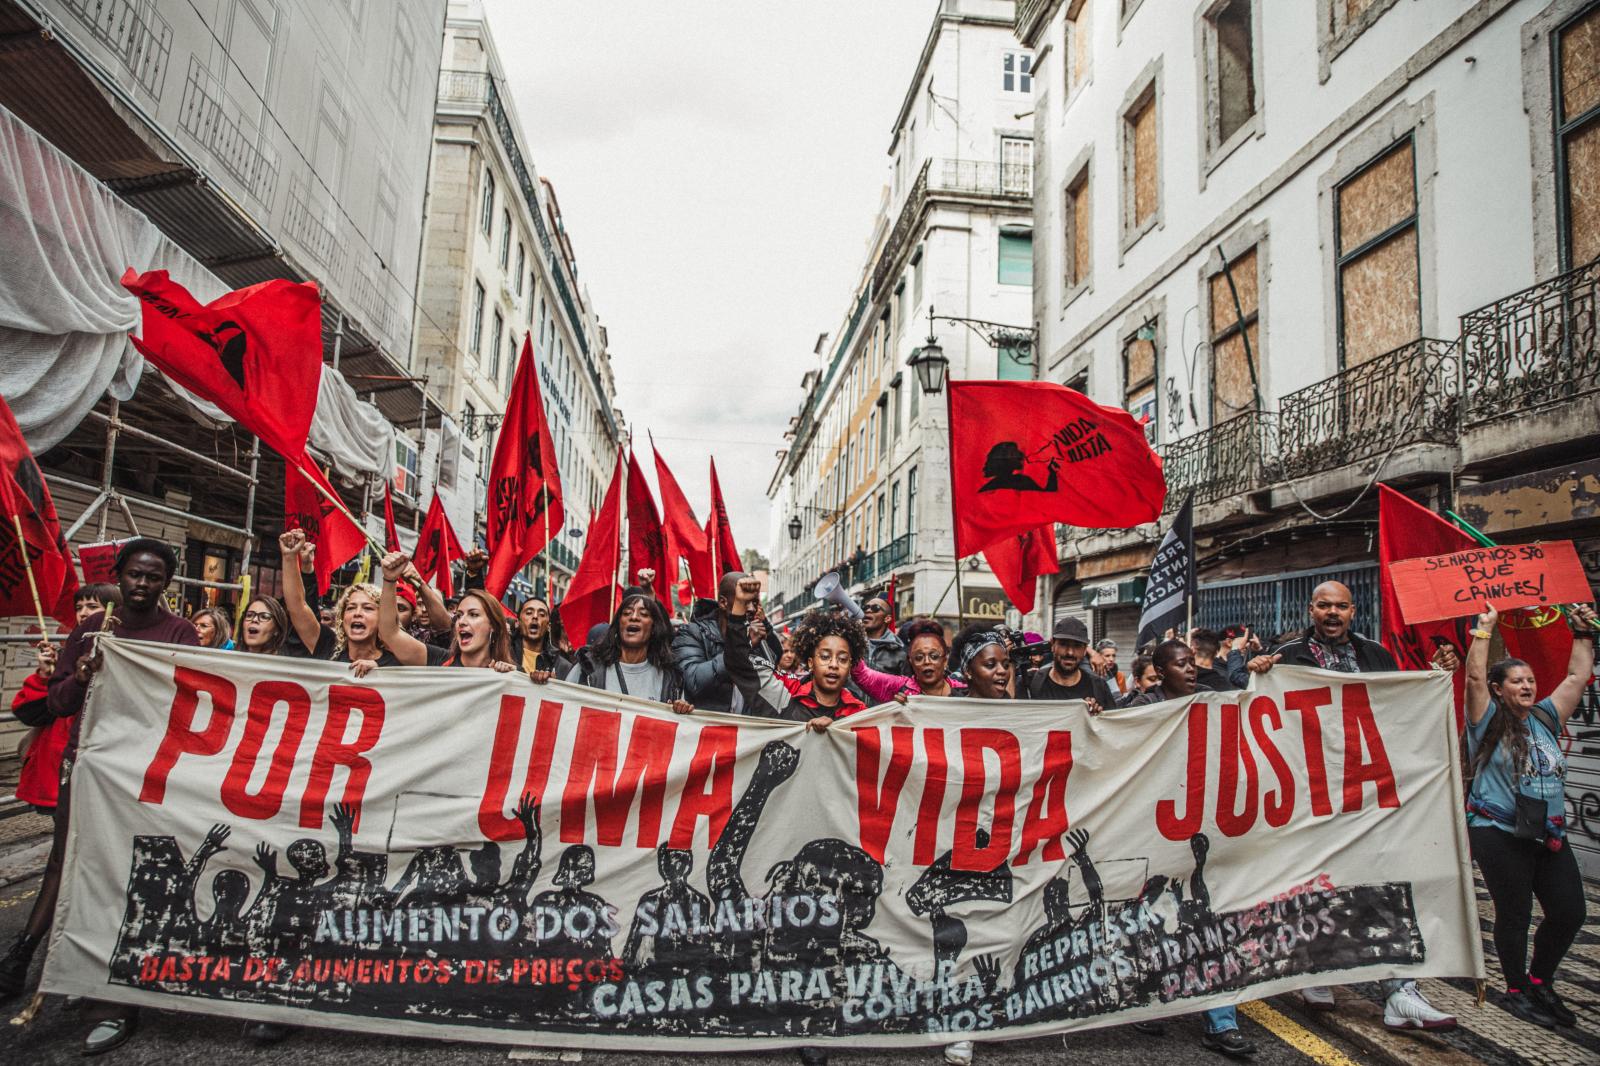 A Cry for Fairness: Vida Justa Protest